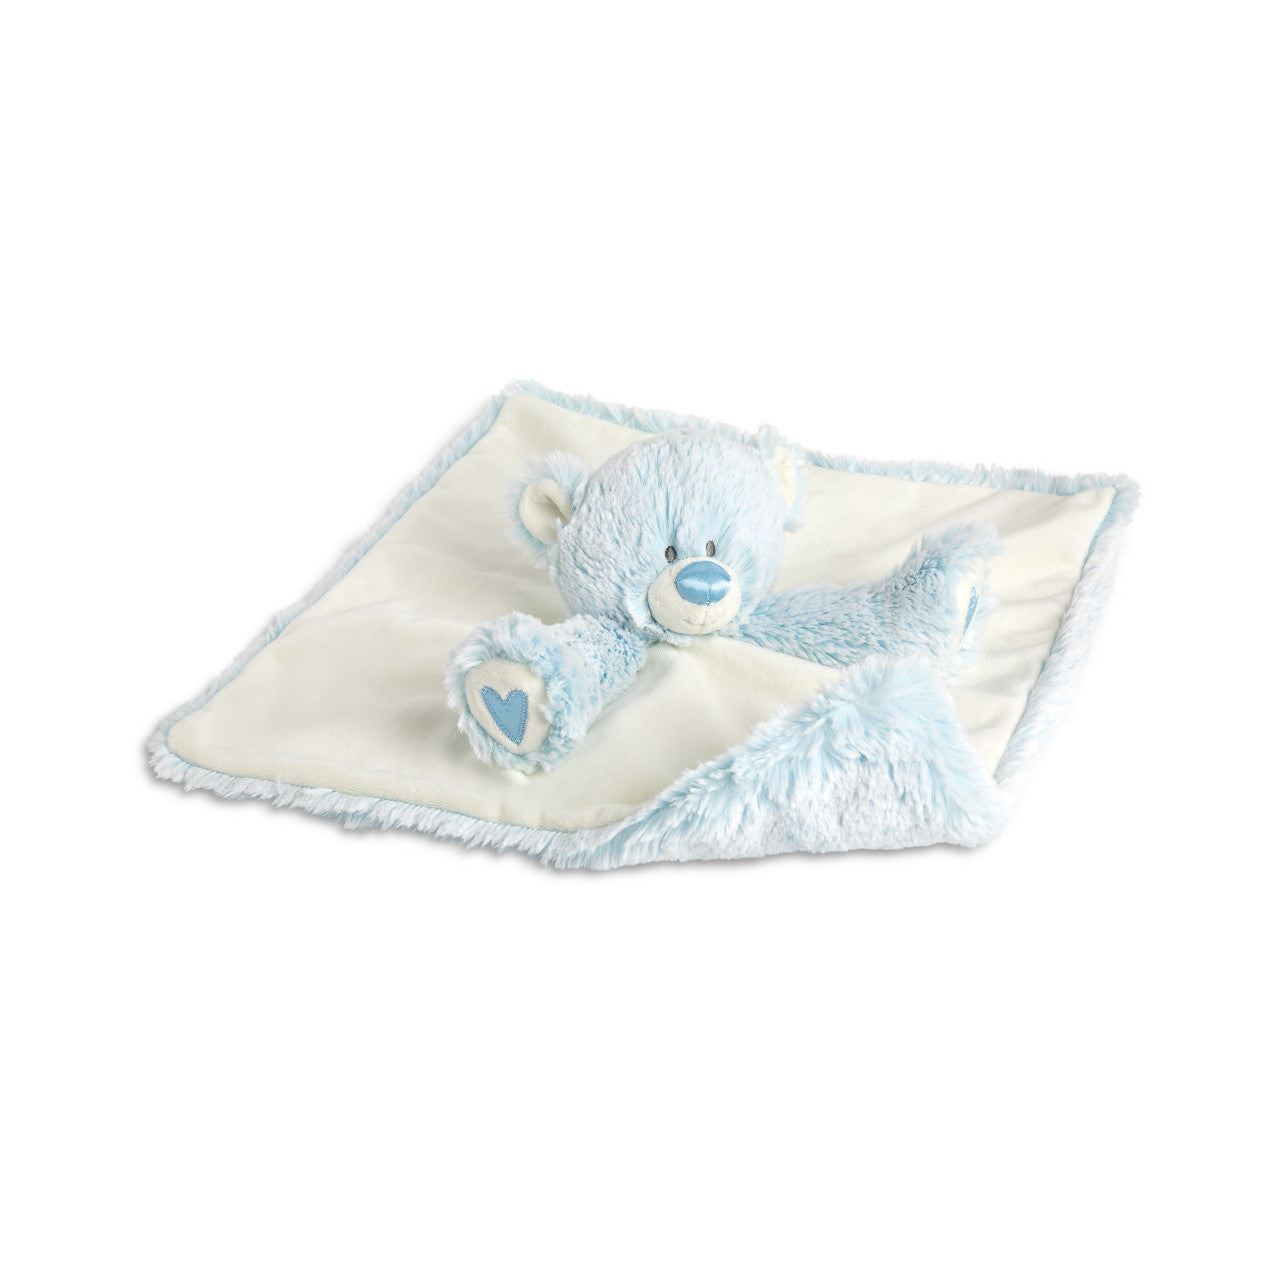 Demdaco Teddy Rattle Blankie - Blue available at The Good Life Boutique